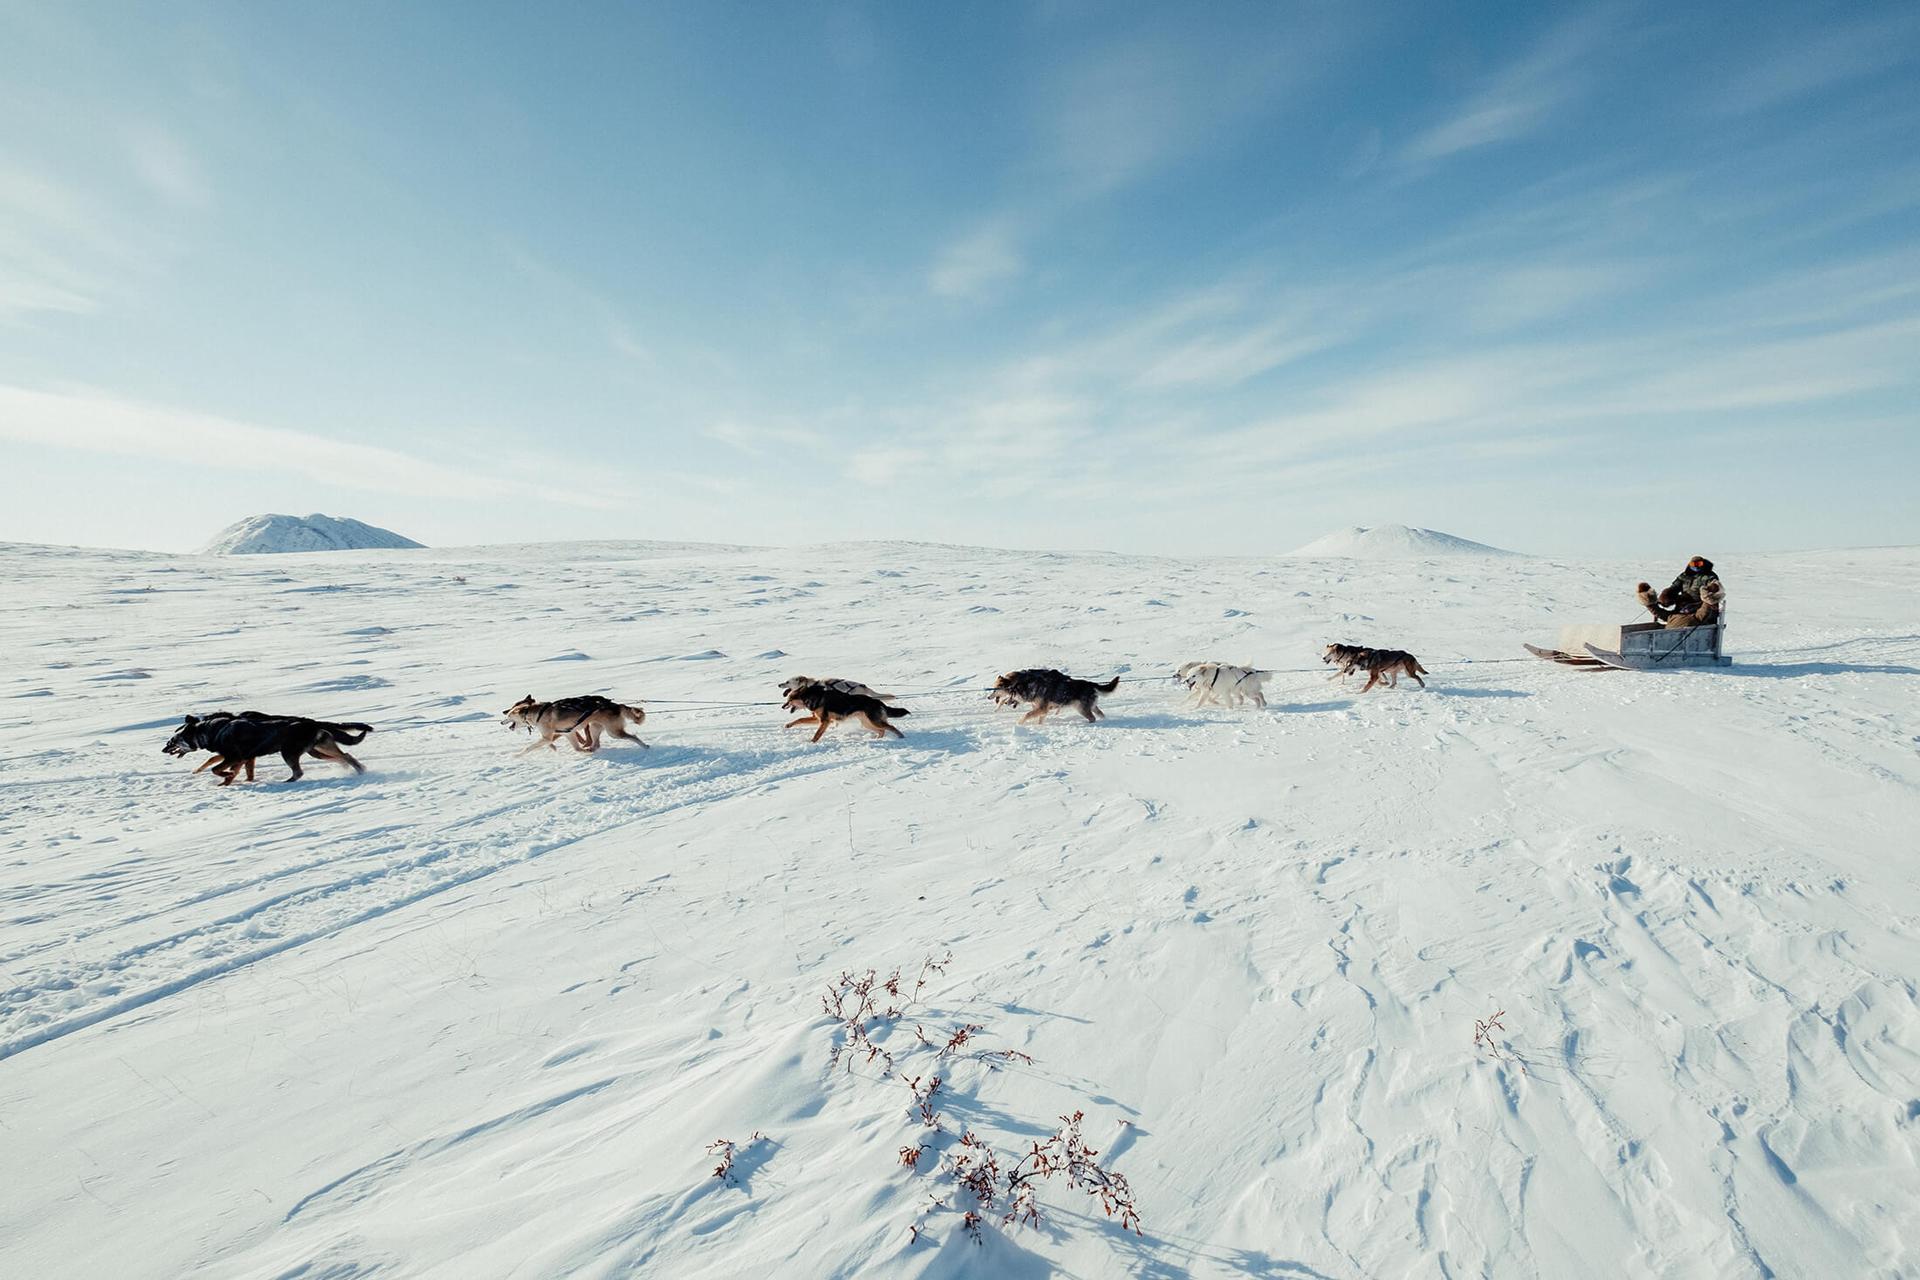 A person rides a dogsled with a team of dogs across a snowy plain